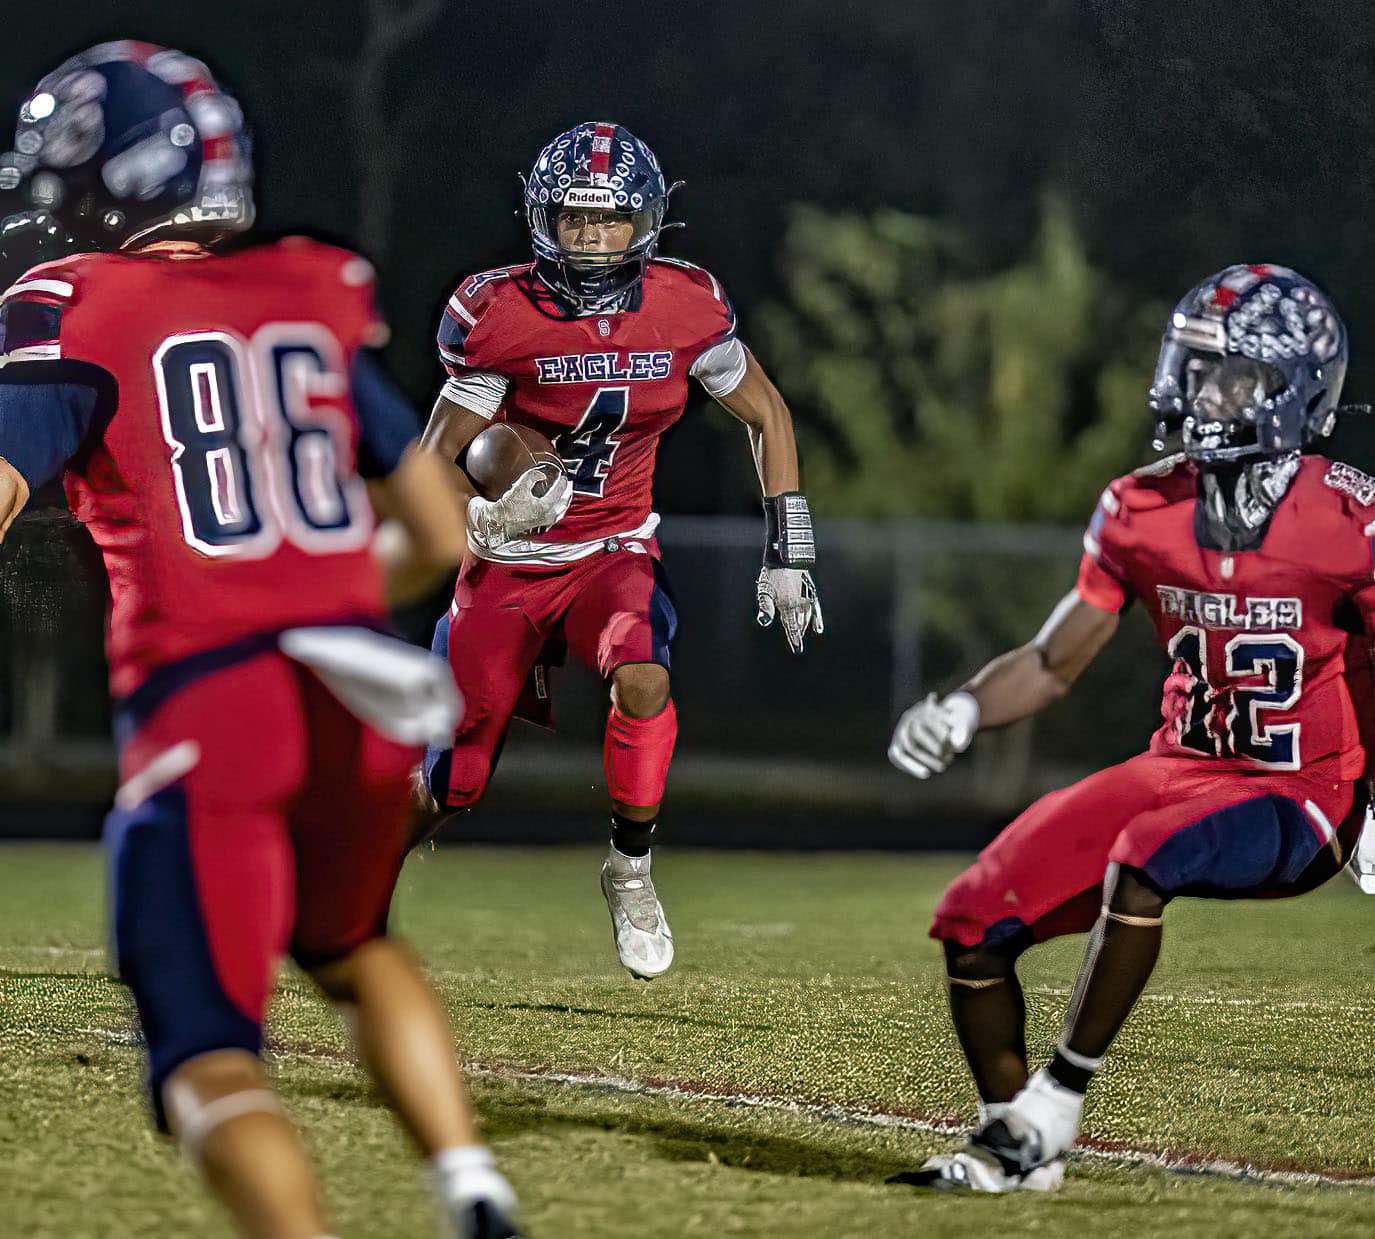 Springstead ,4, Connor Mccazzio sizes up the blocking on a running play. Photo by JOE DiCRISTOFALO